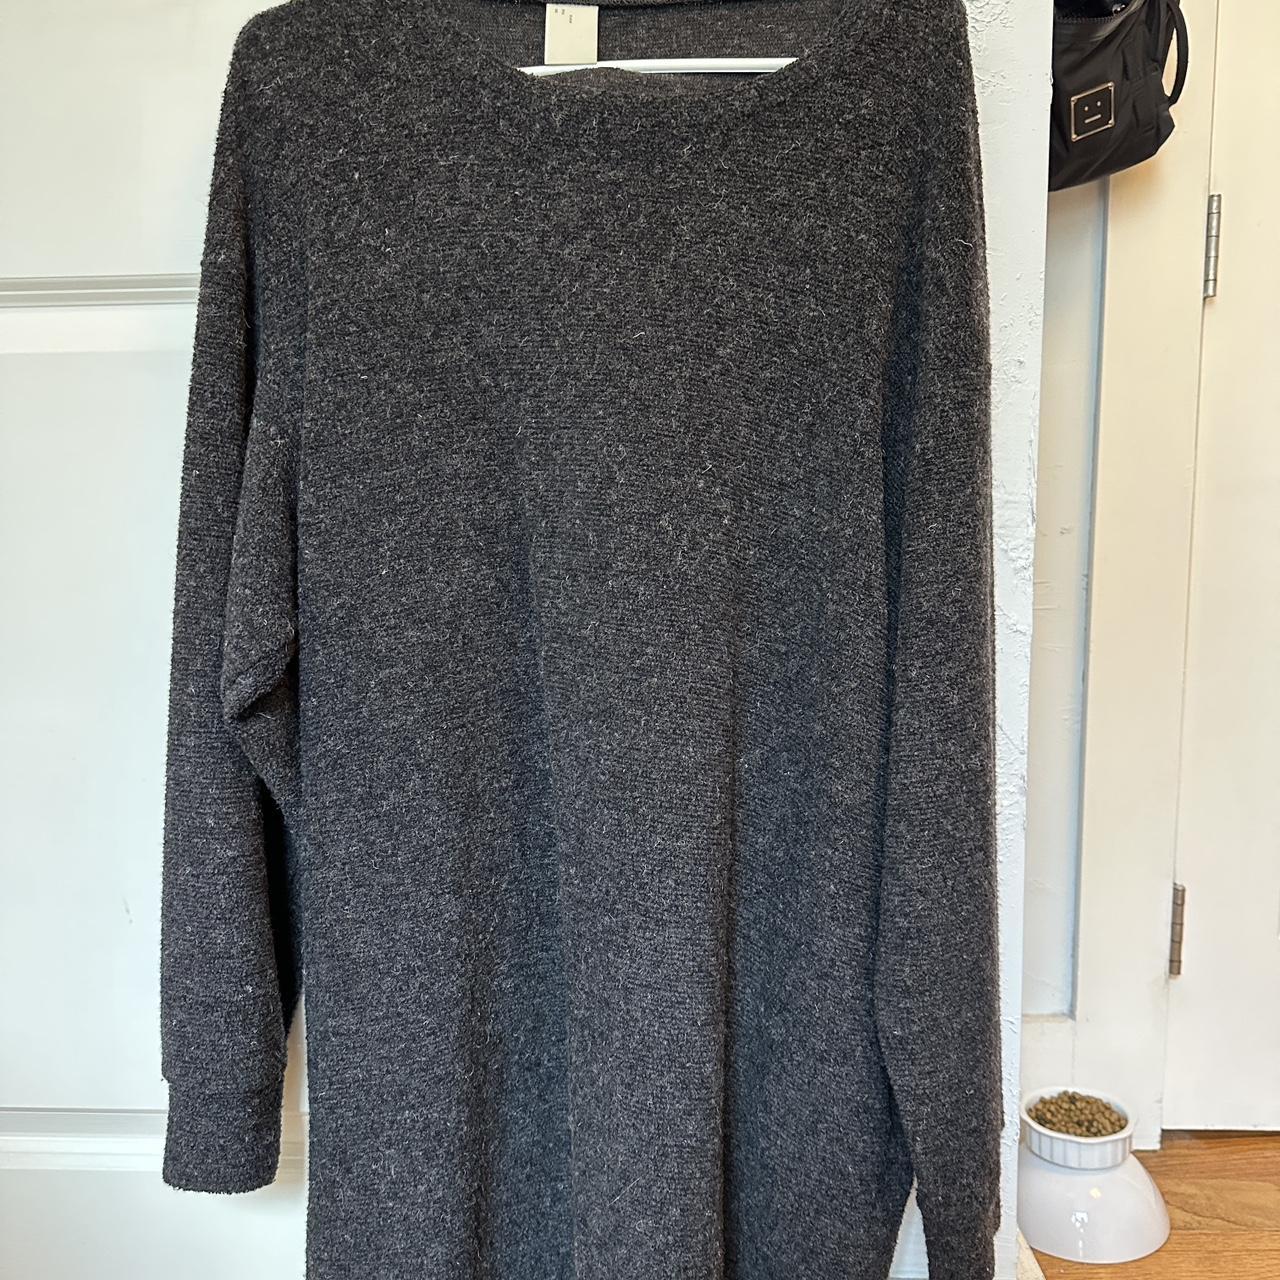 N. Hoolywood knit sweater that is knee length,...